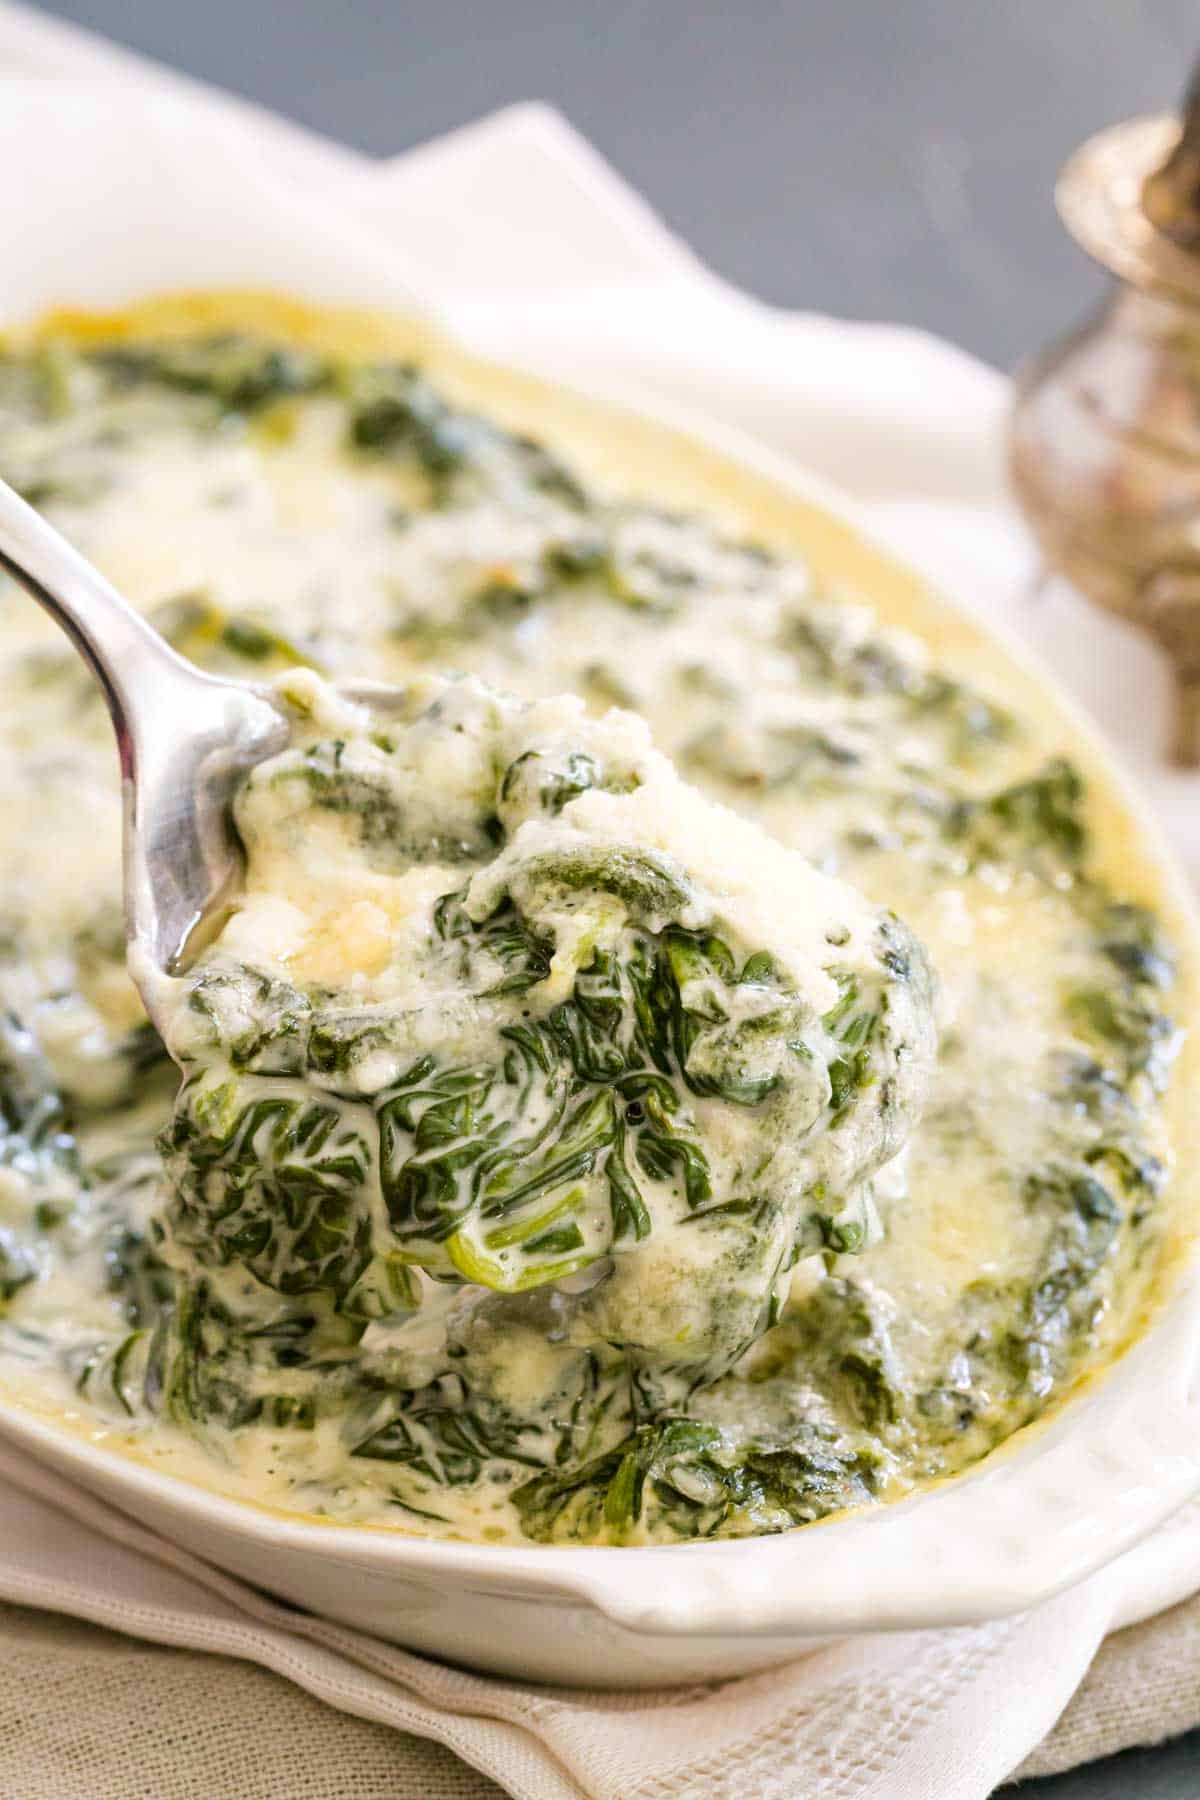 A serving spoon lifts out cheese-topped cream spinach to show the cooked spinach inside.